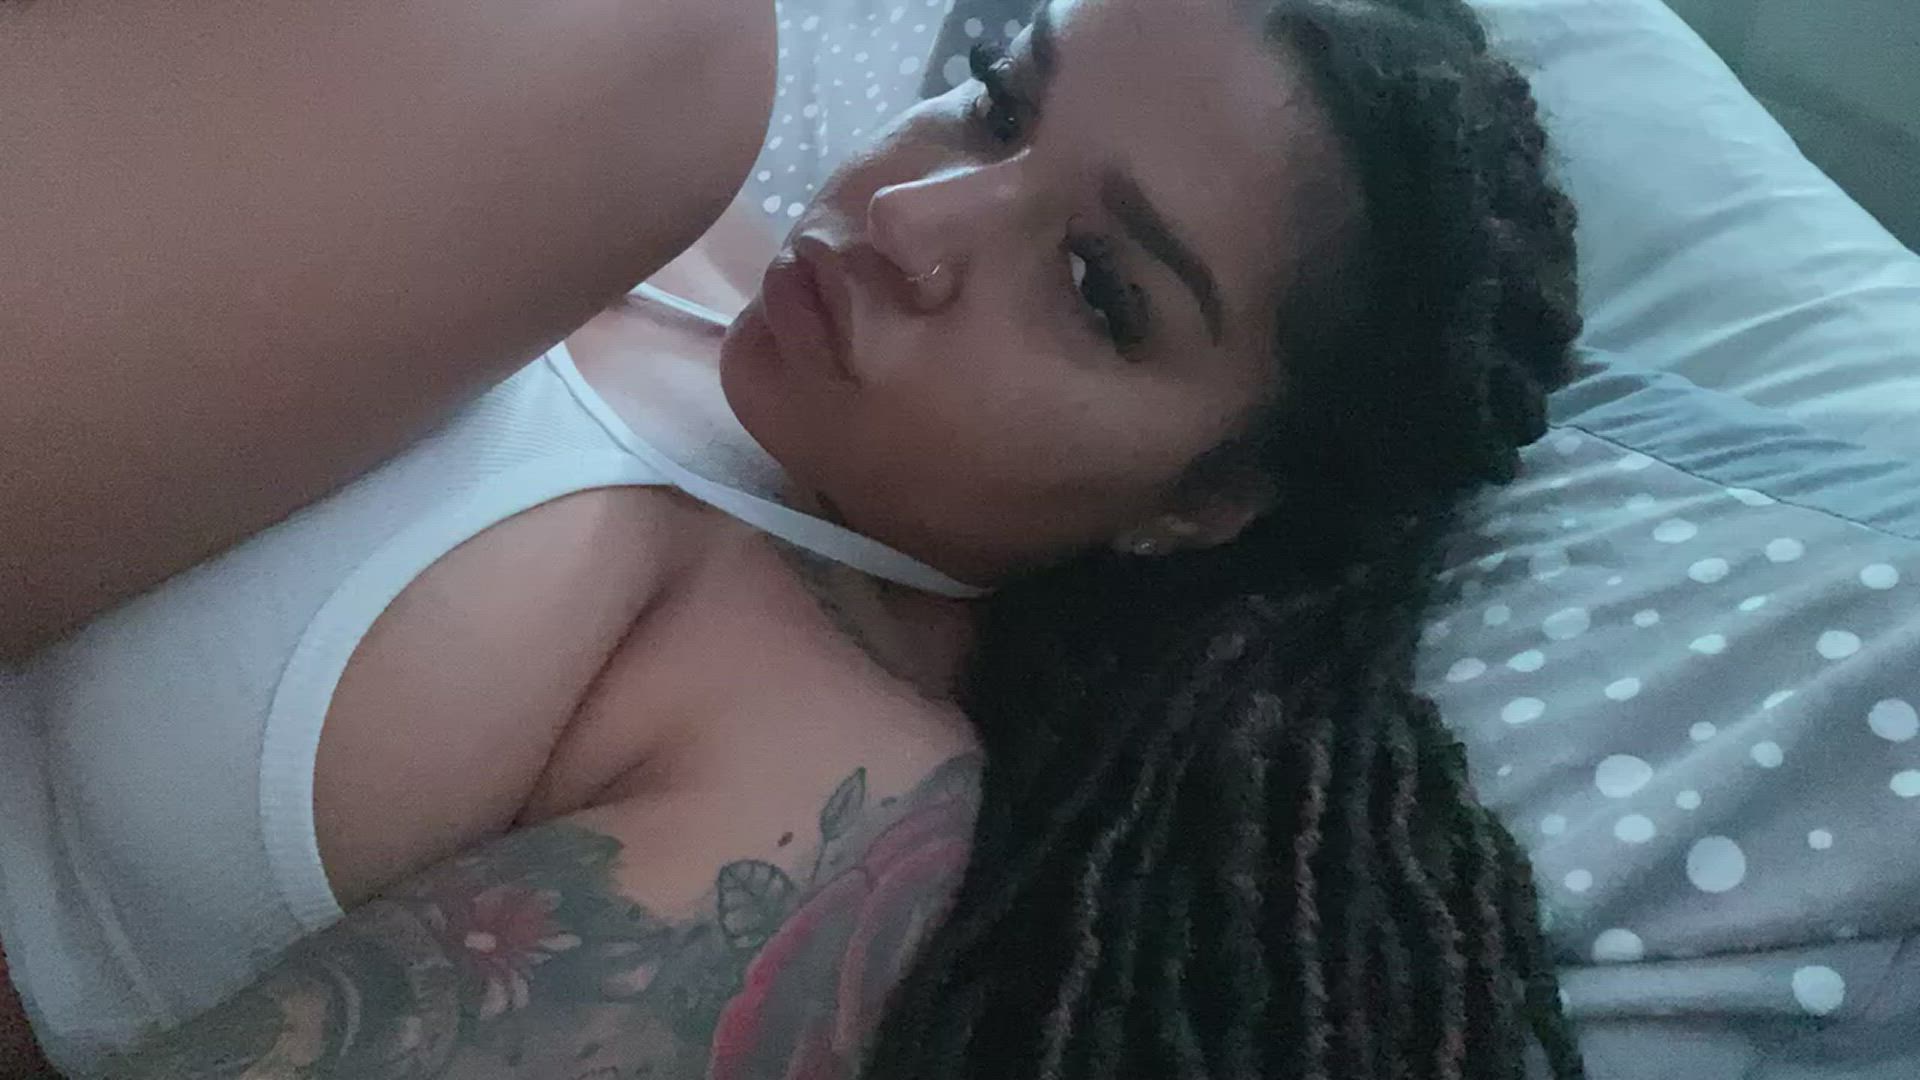 Amateur porn video with onlyfans model mikayladenise <strong>@m.kayladenise</strong>